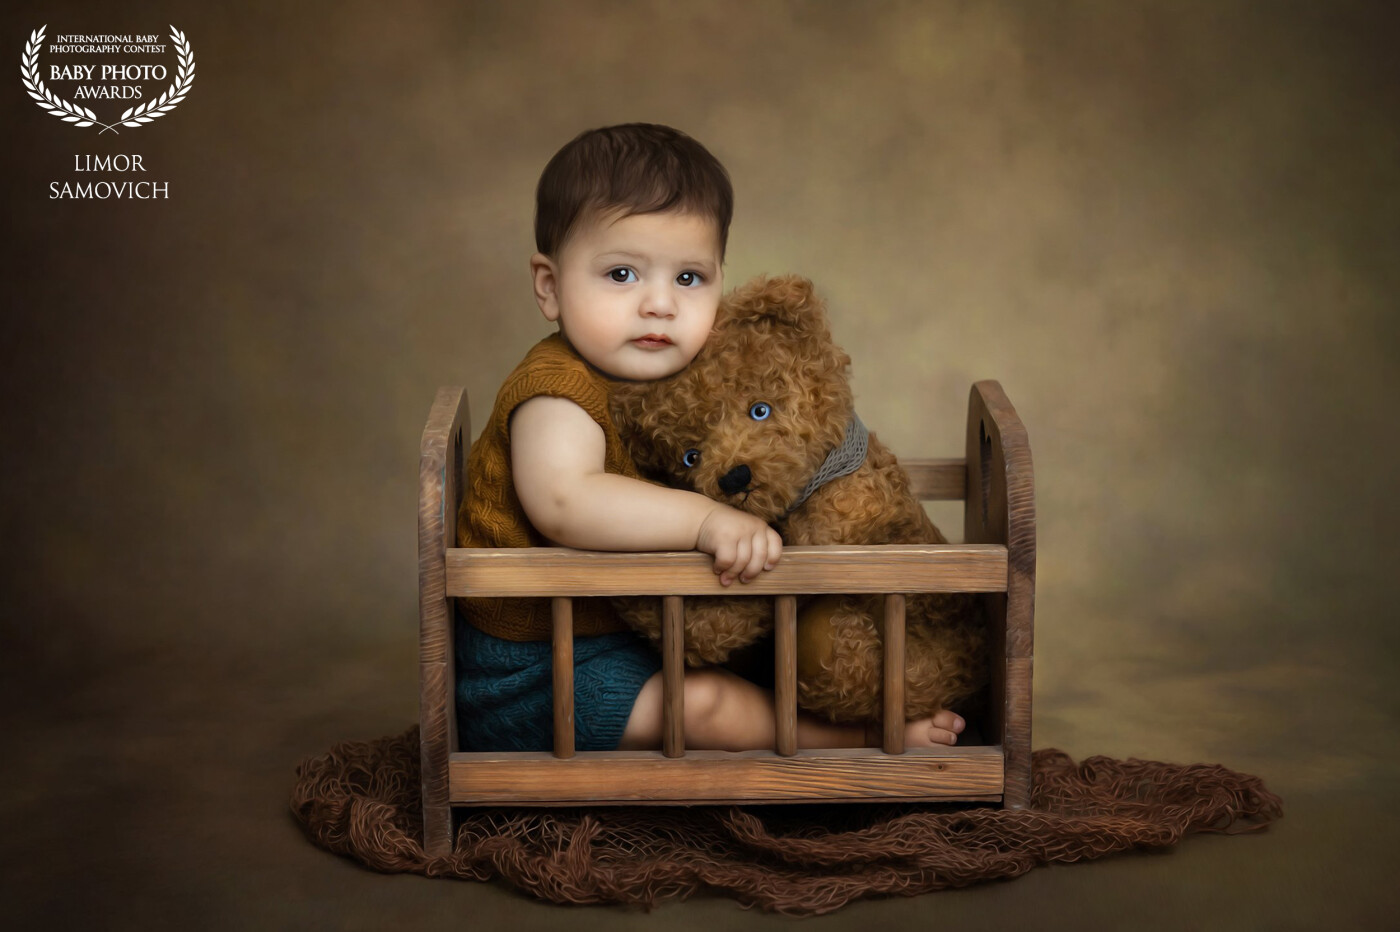 This 7 month old baby boy did not want to be next to this teddy bear. We tried to make him laugh and then we got a second..<br />
Lucky me, I was ready with my camera!